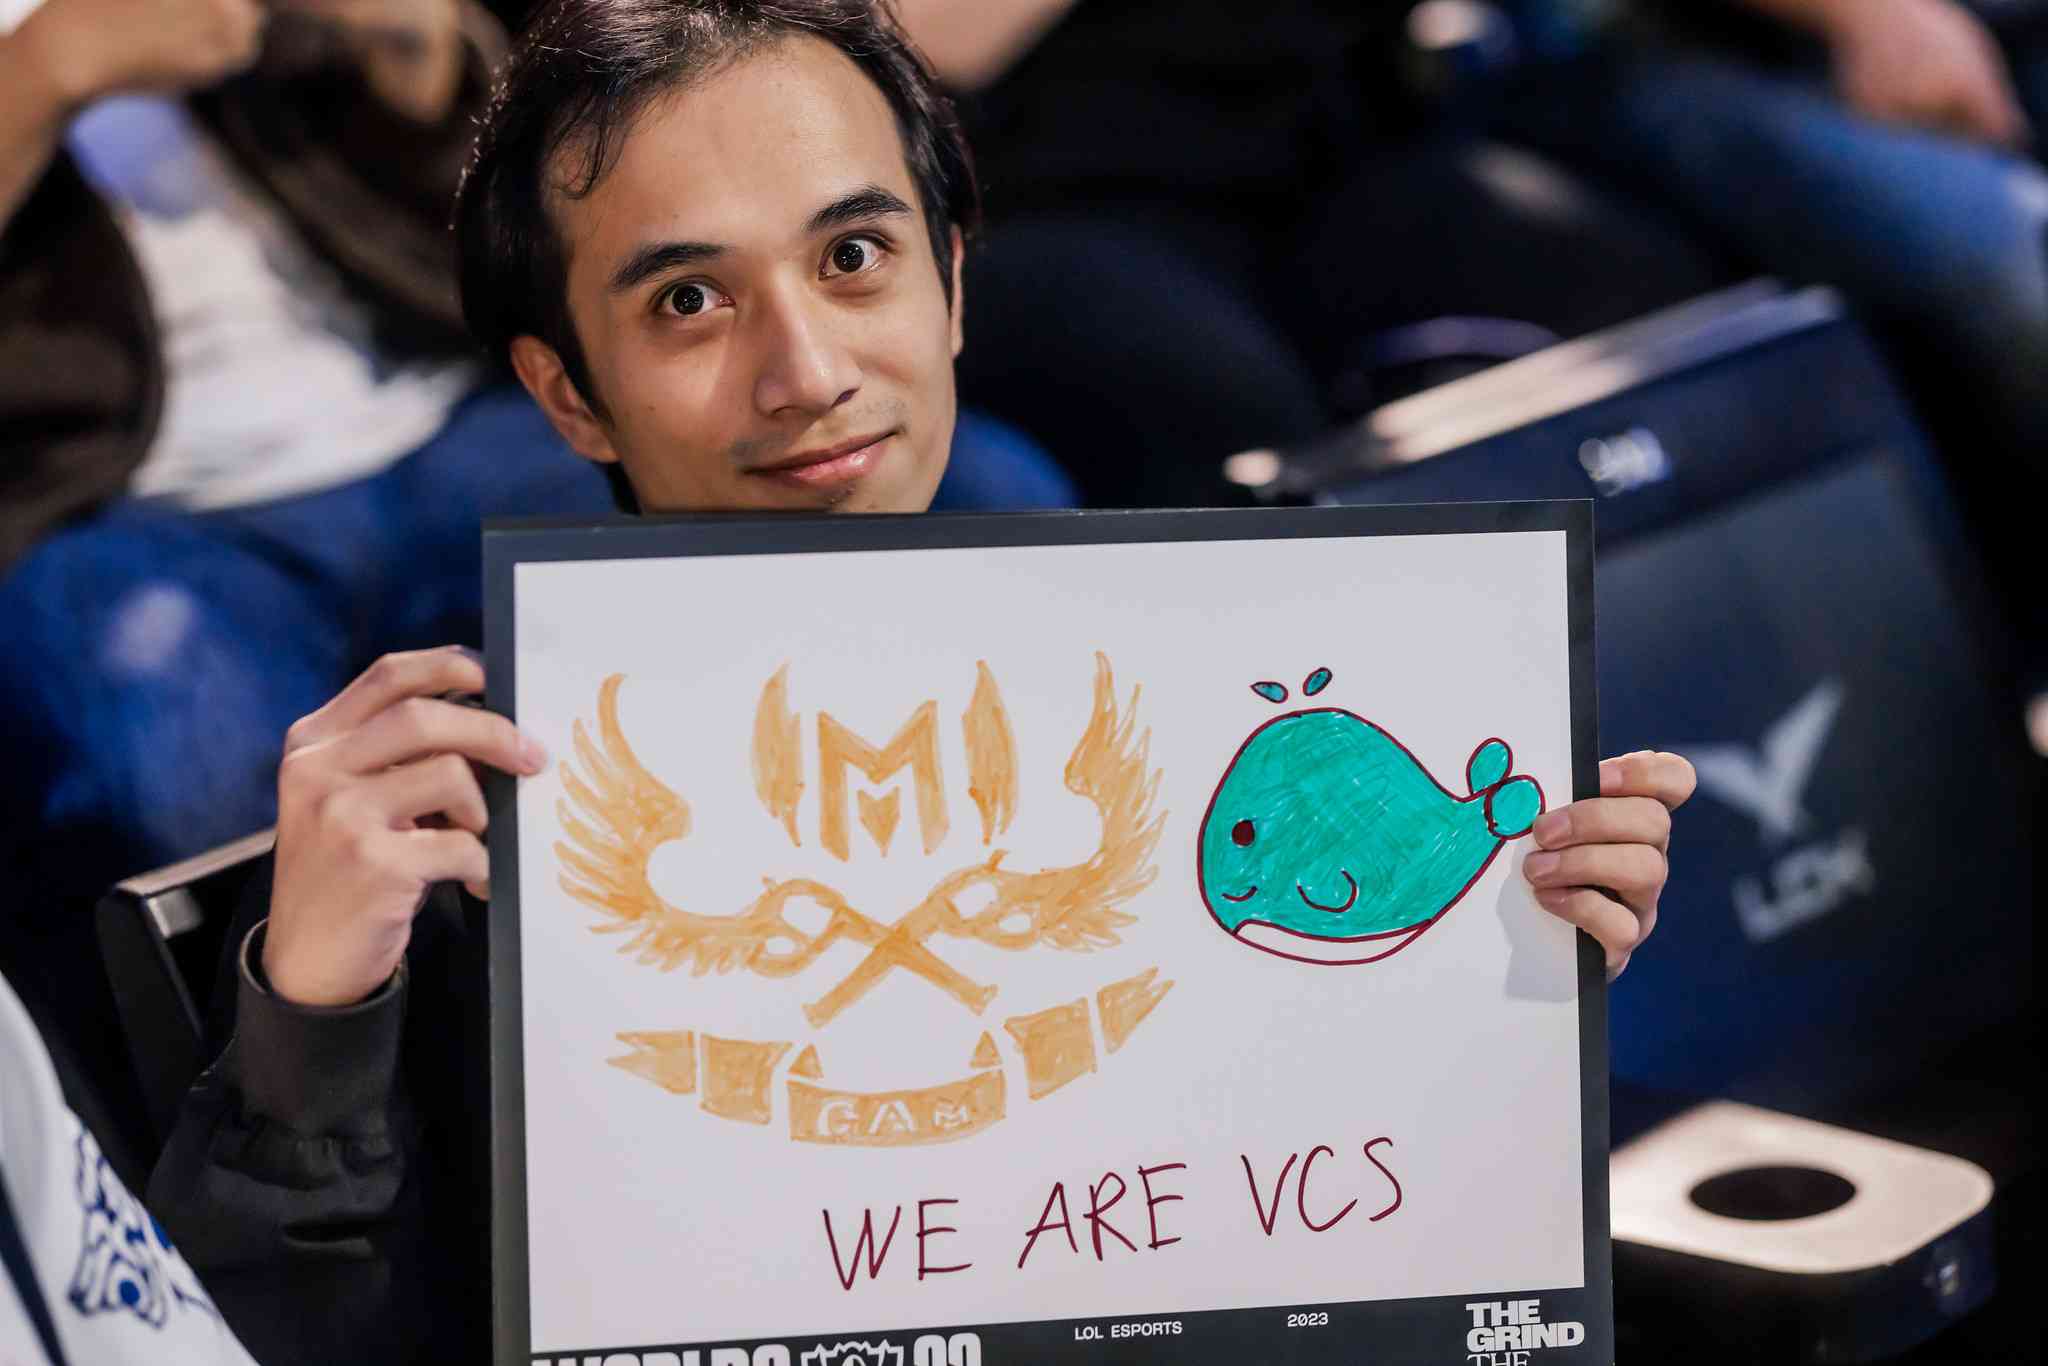 The Worlds audience is excited for the rematch of VCS’ young blood (Image Credits: Colin Young-Wolff/Riot Games)